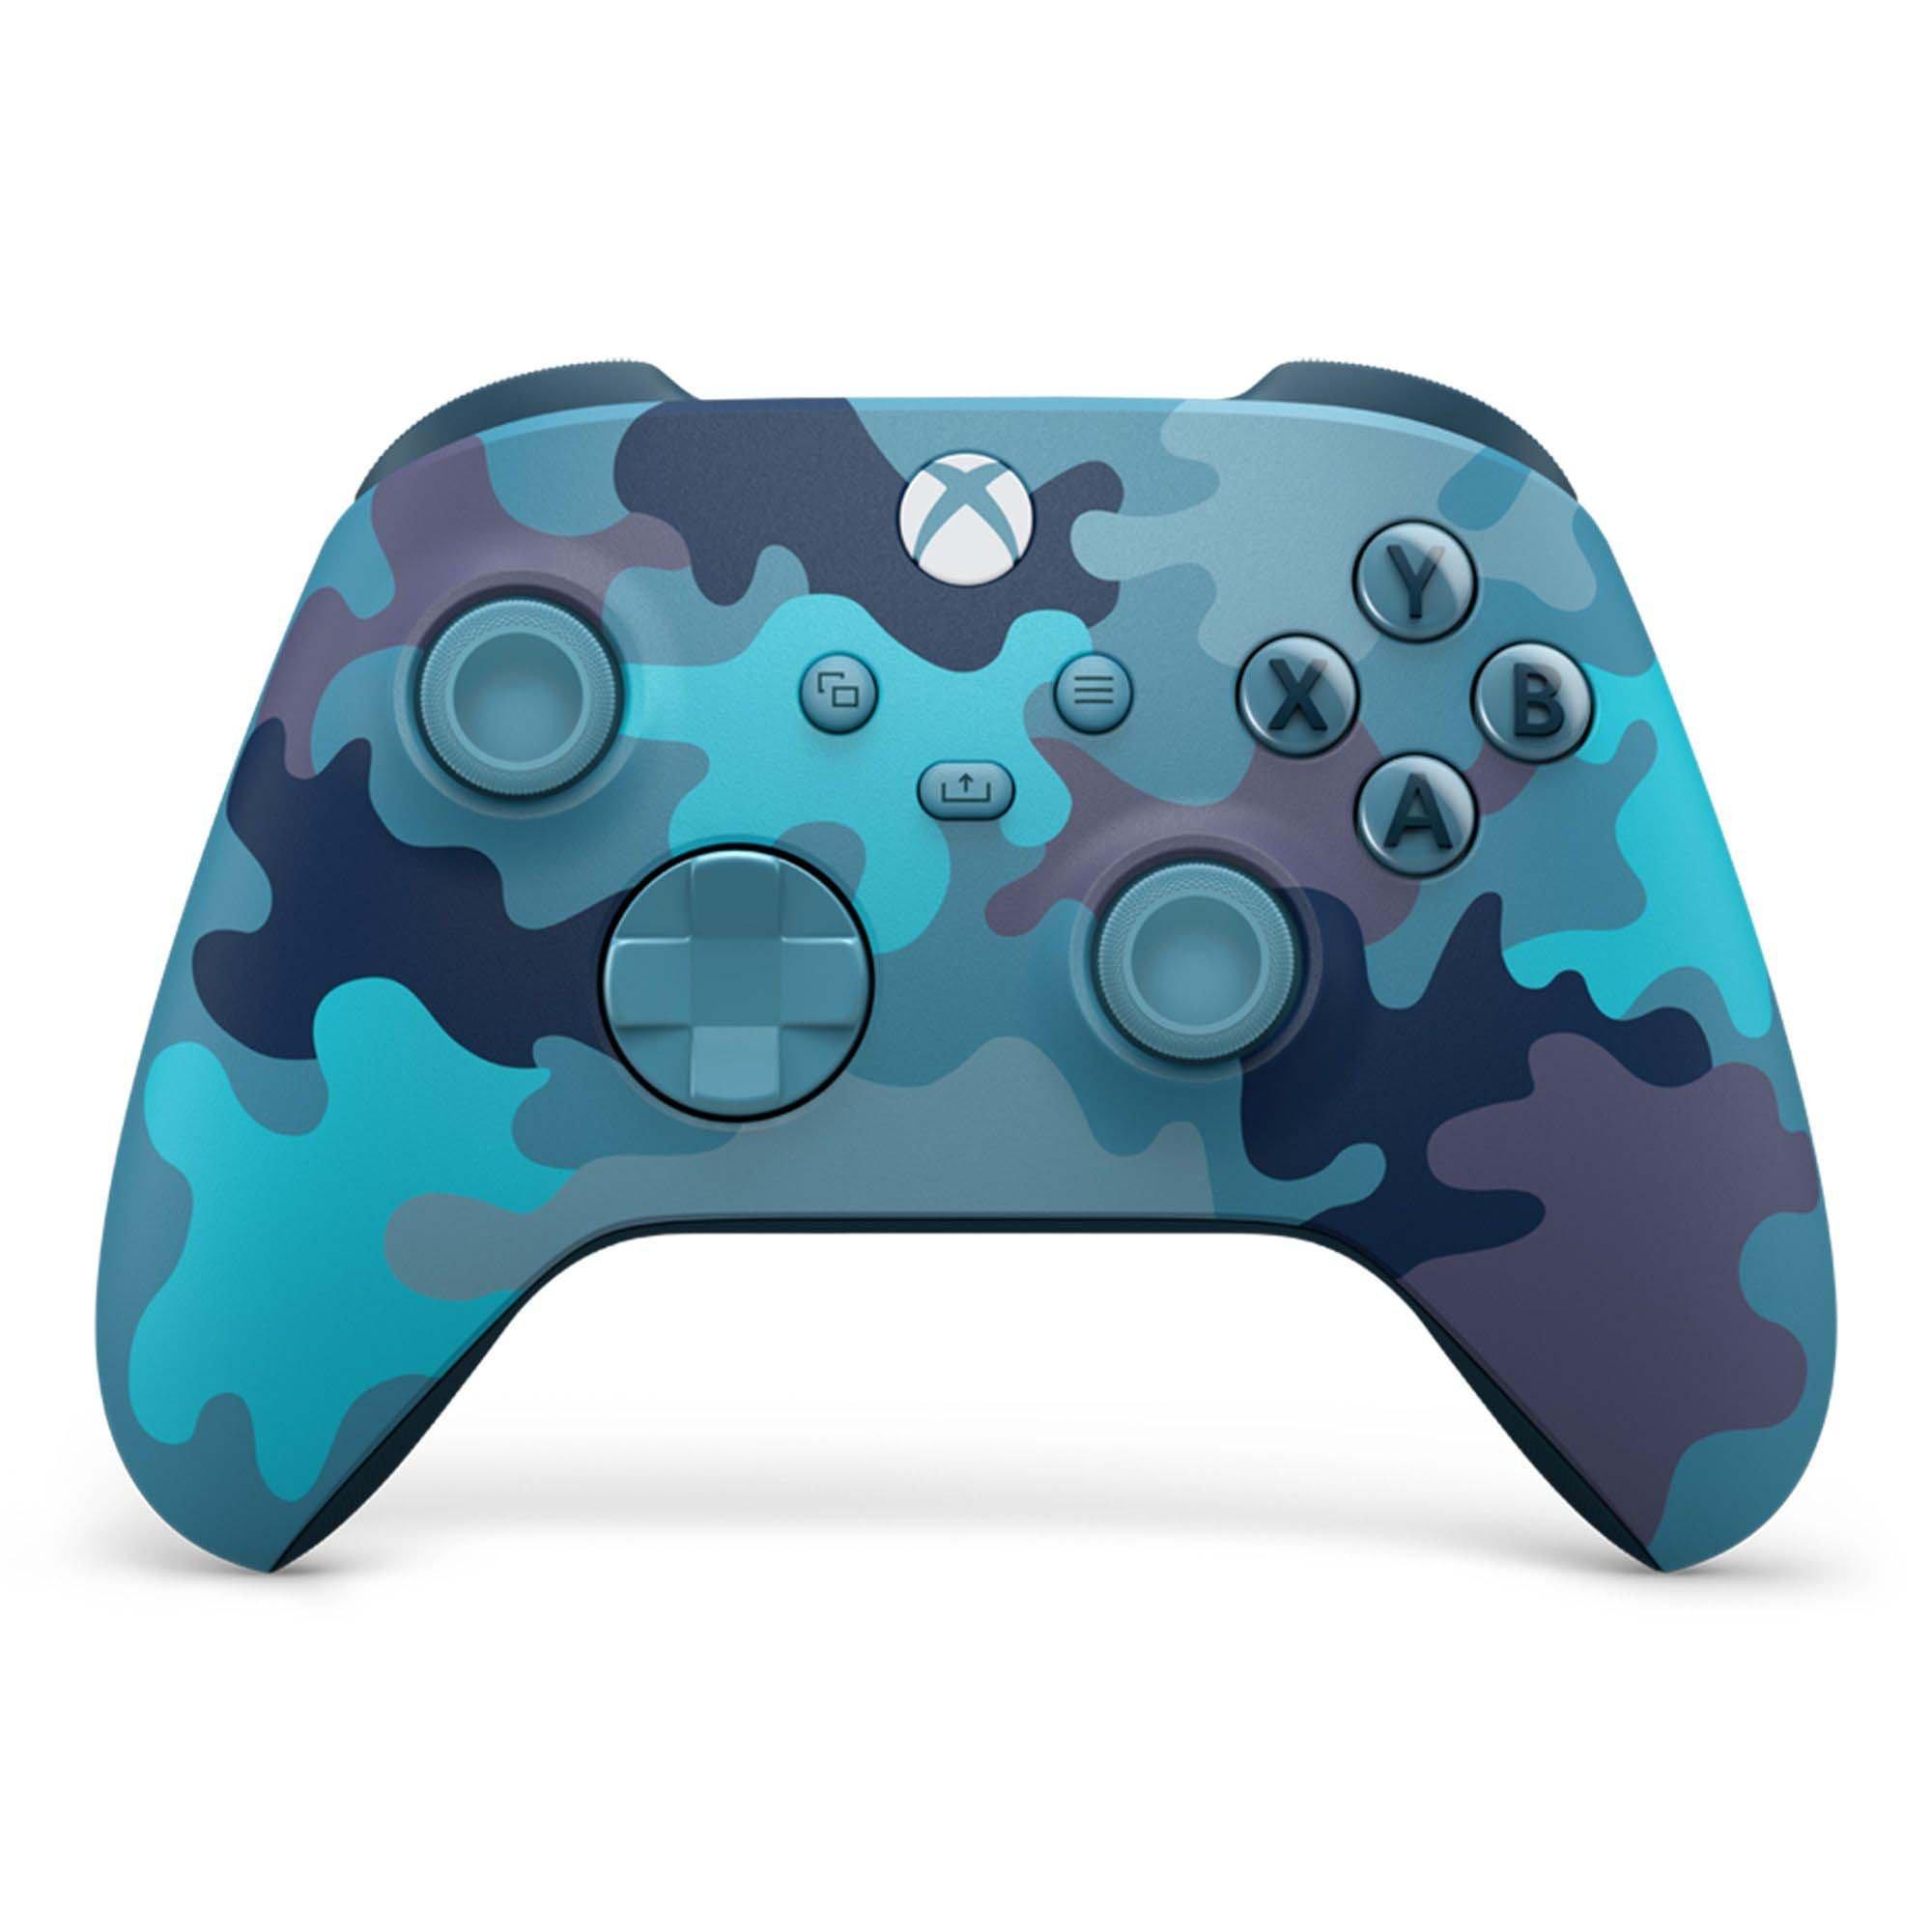 Microsoft Xbox Wireless Controller - Mineral Camo Special Edition <Used>